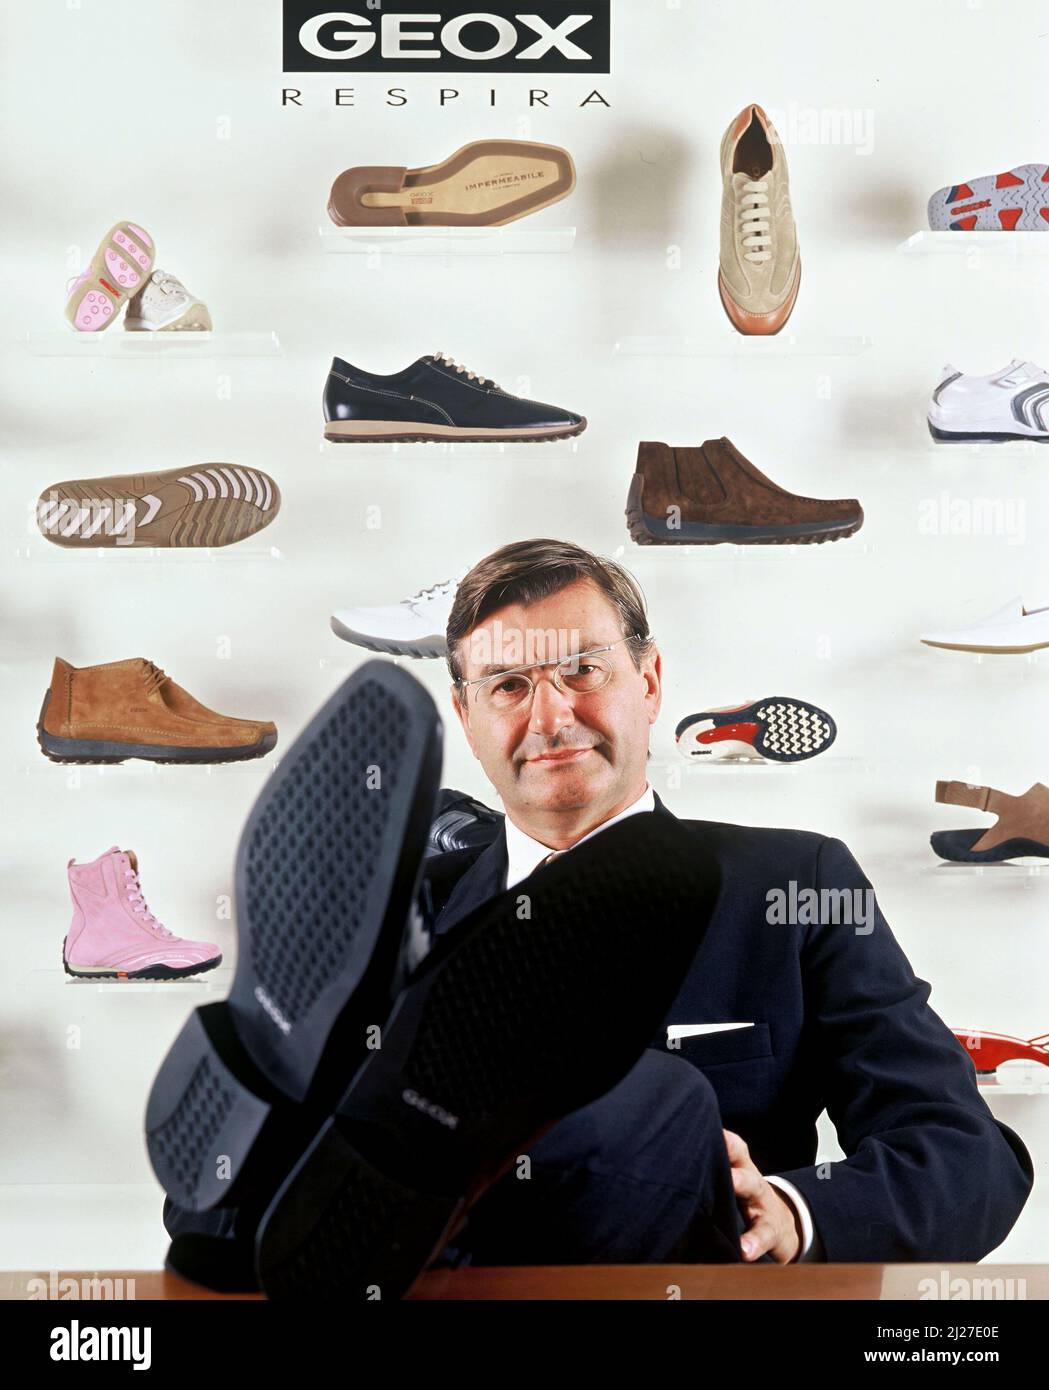 Italy, Montebelluna (Treviso) : Mario Moretti Polegato, founder of Geox SpA  Company. Geox is a world leader in the shoes industry. Photo © Sandro Mi  Stock Photo - Alamy